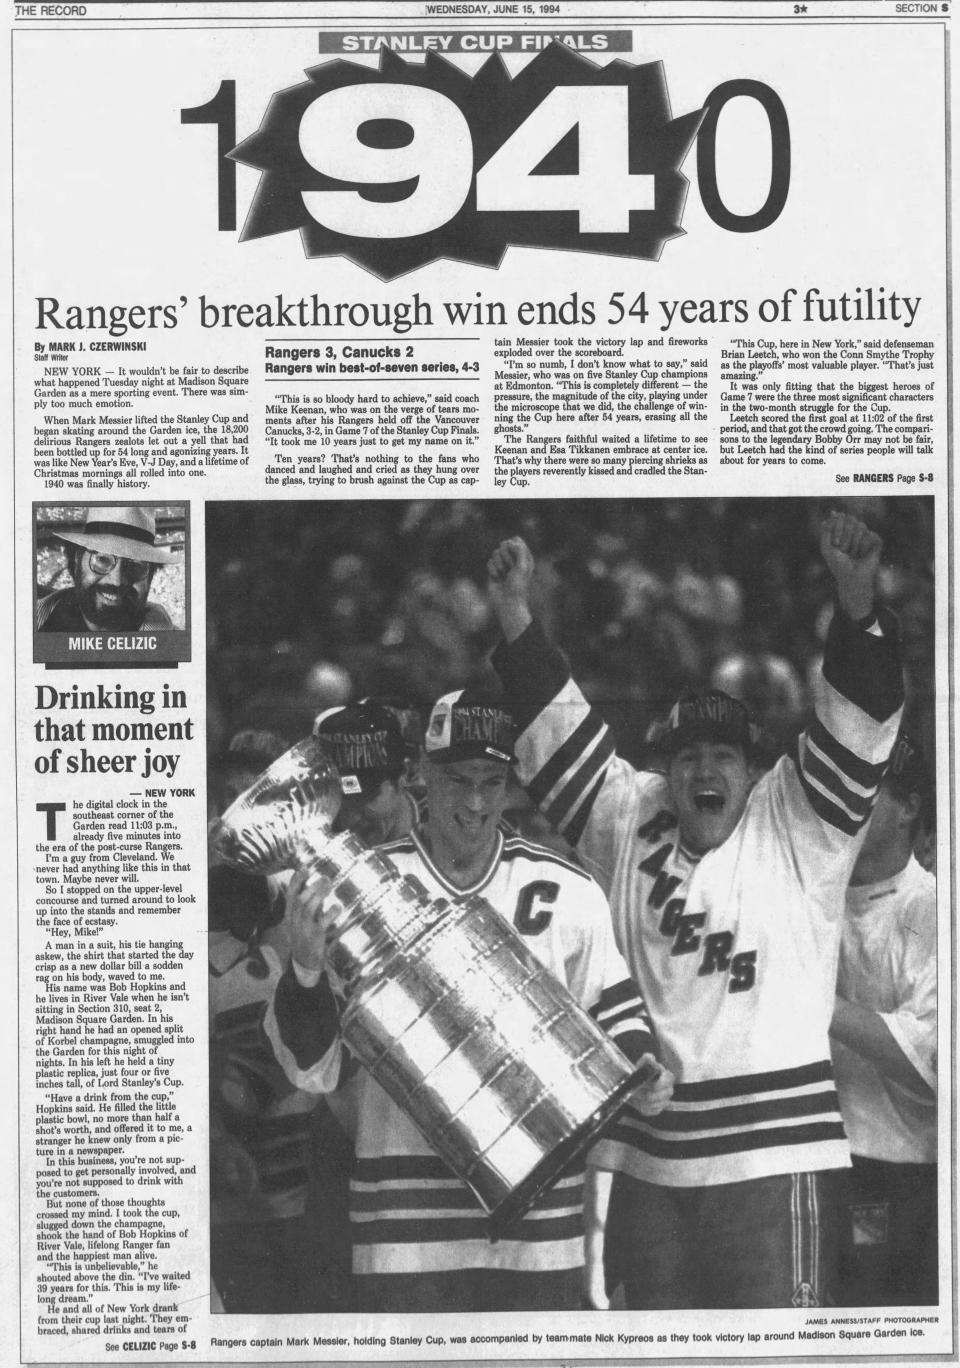 Page S-1 of the June 15, 1994 edition of The Record, published the day after the New York Rangers won the Stanley Cup for the first time in 54 years.